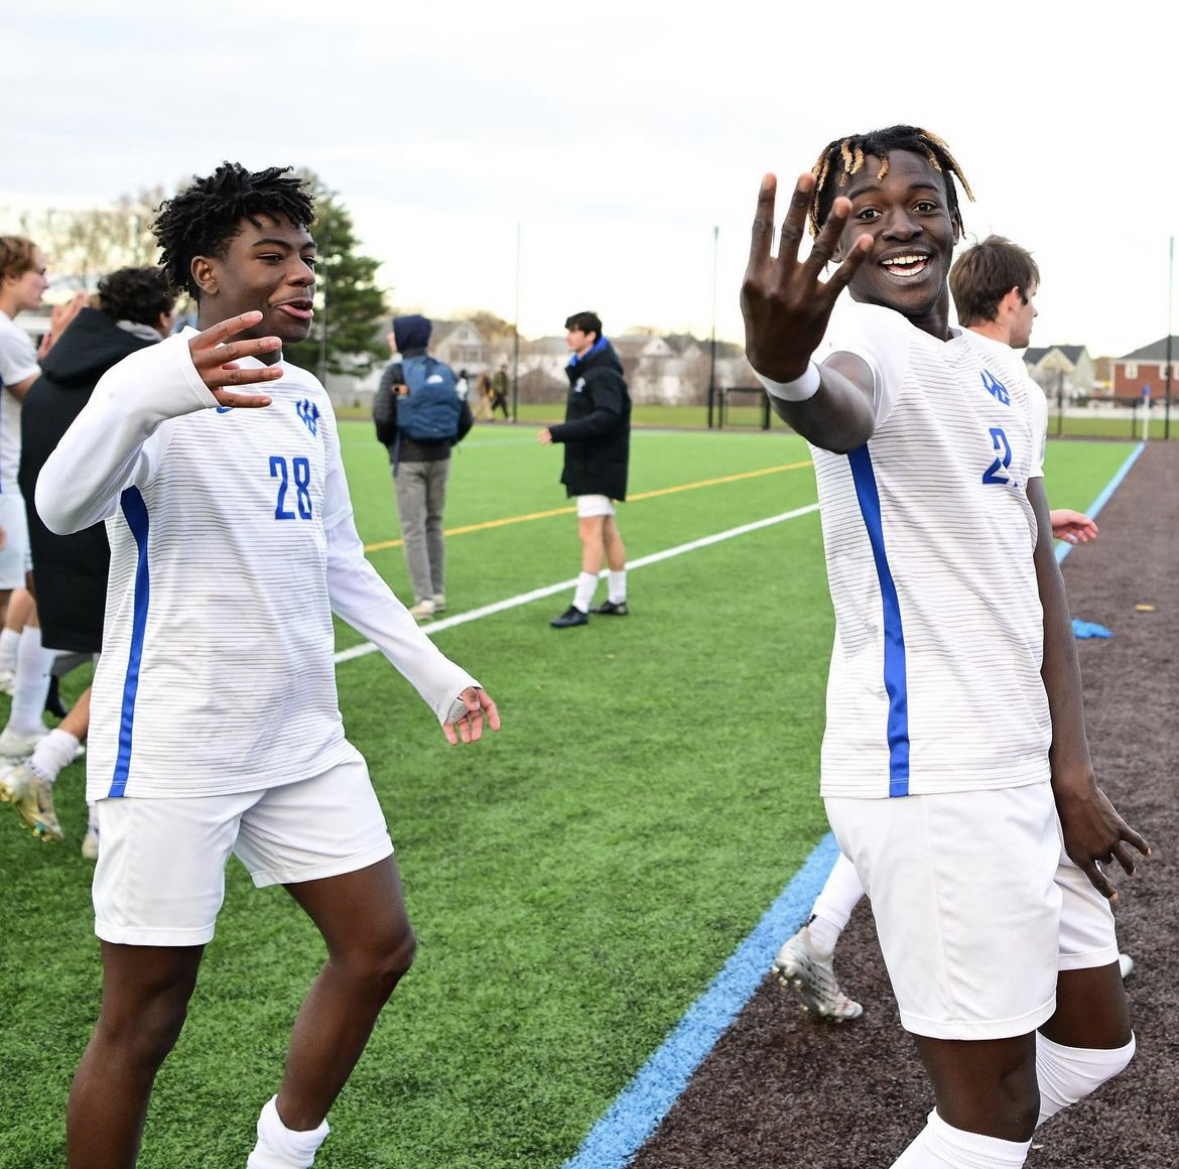 (Left to right) Dmitri Tulloch, ‘27, and Weyimi Agbeyegbe, ‘25, show excitement for their team heading into the NCAA Division III men’s soccer Final Four. Photo courtesy of Generals Athletics